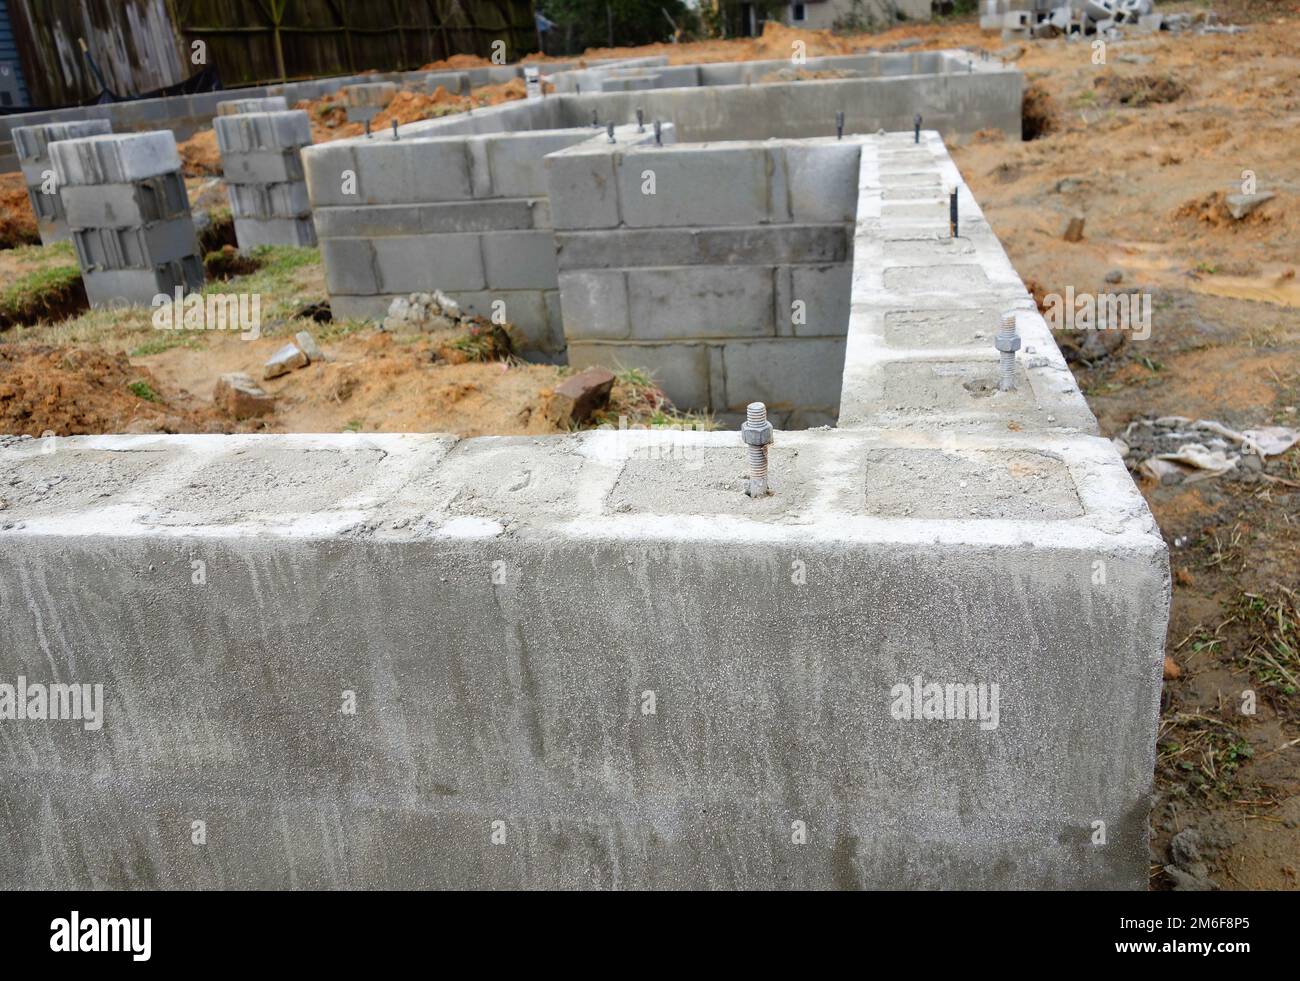 Cinder block foundation being built for new home construction Stock Photo